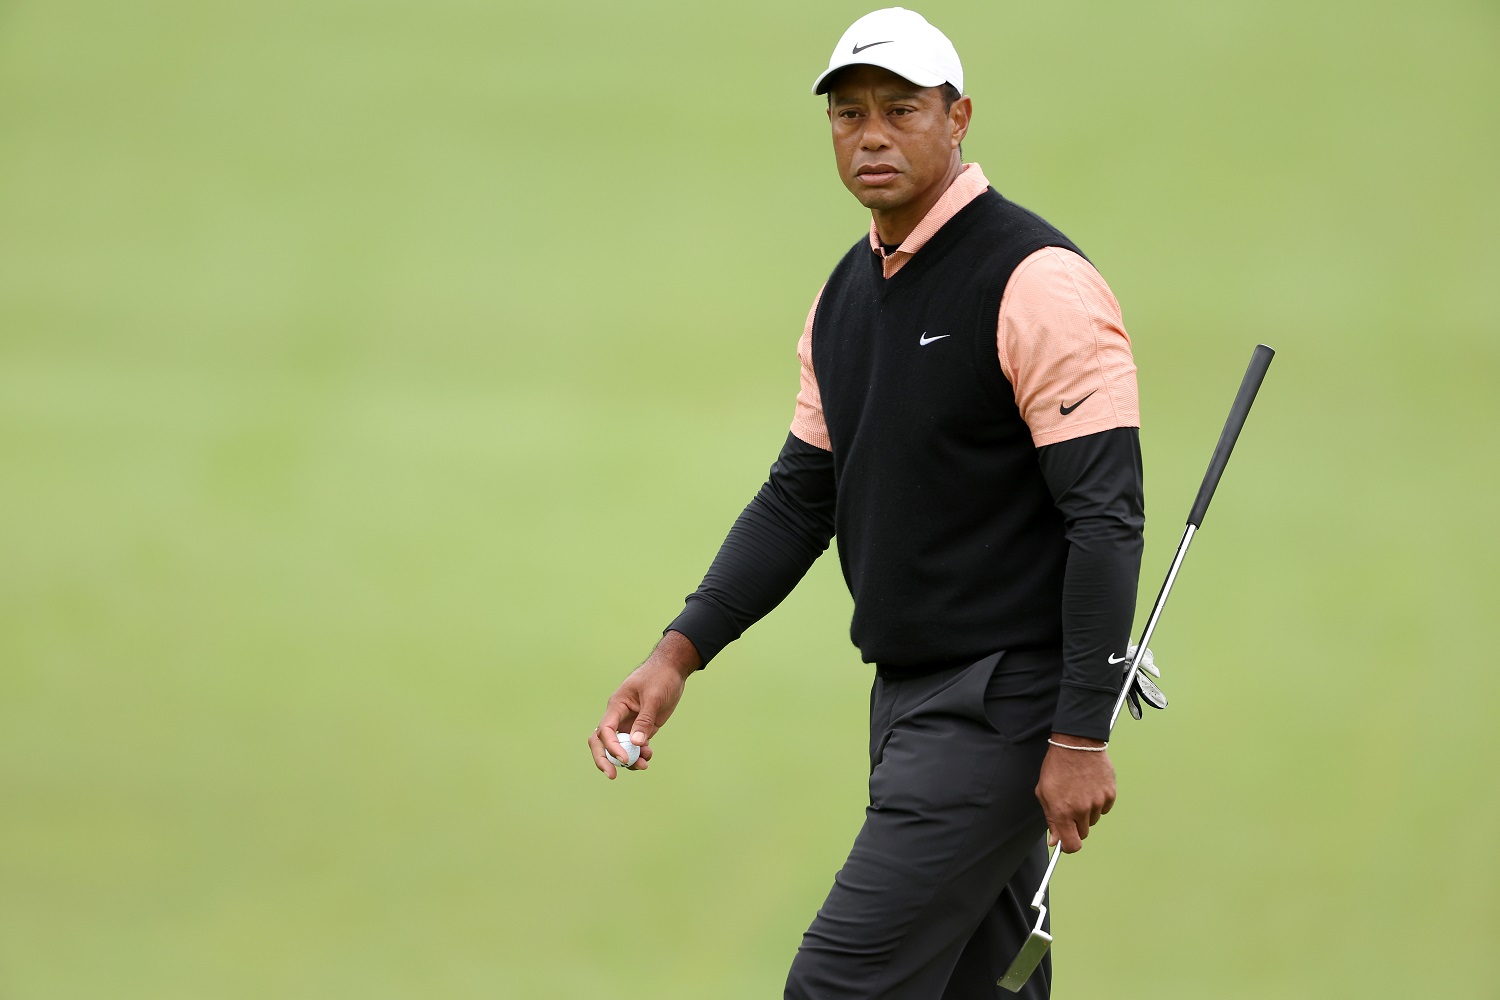 Tiger Woods walks on the 16th hole during the third round of the PGA Championship at Southern Hills Country Club on May 21, 2022 in Tulsa, Oklahoma. | Christian Petersen/Getty Images